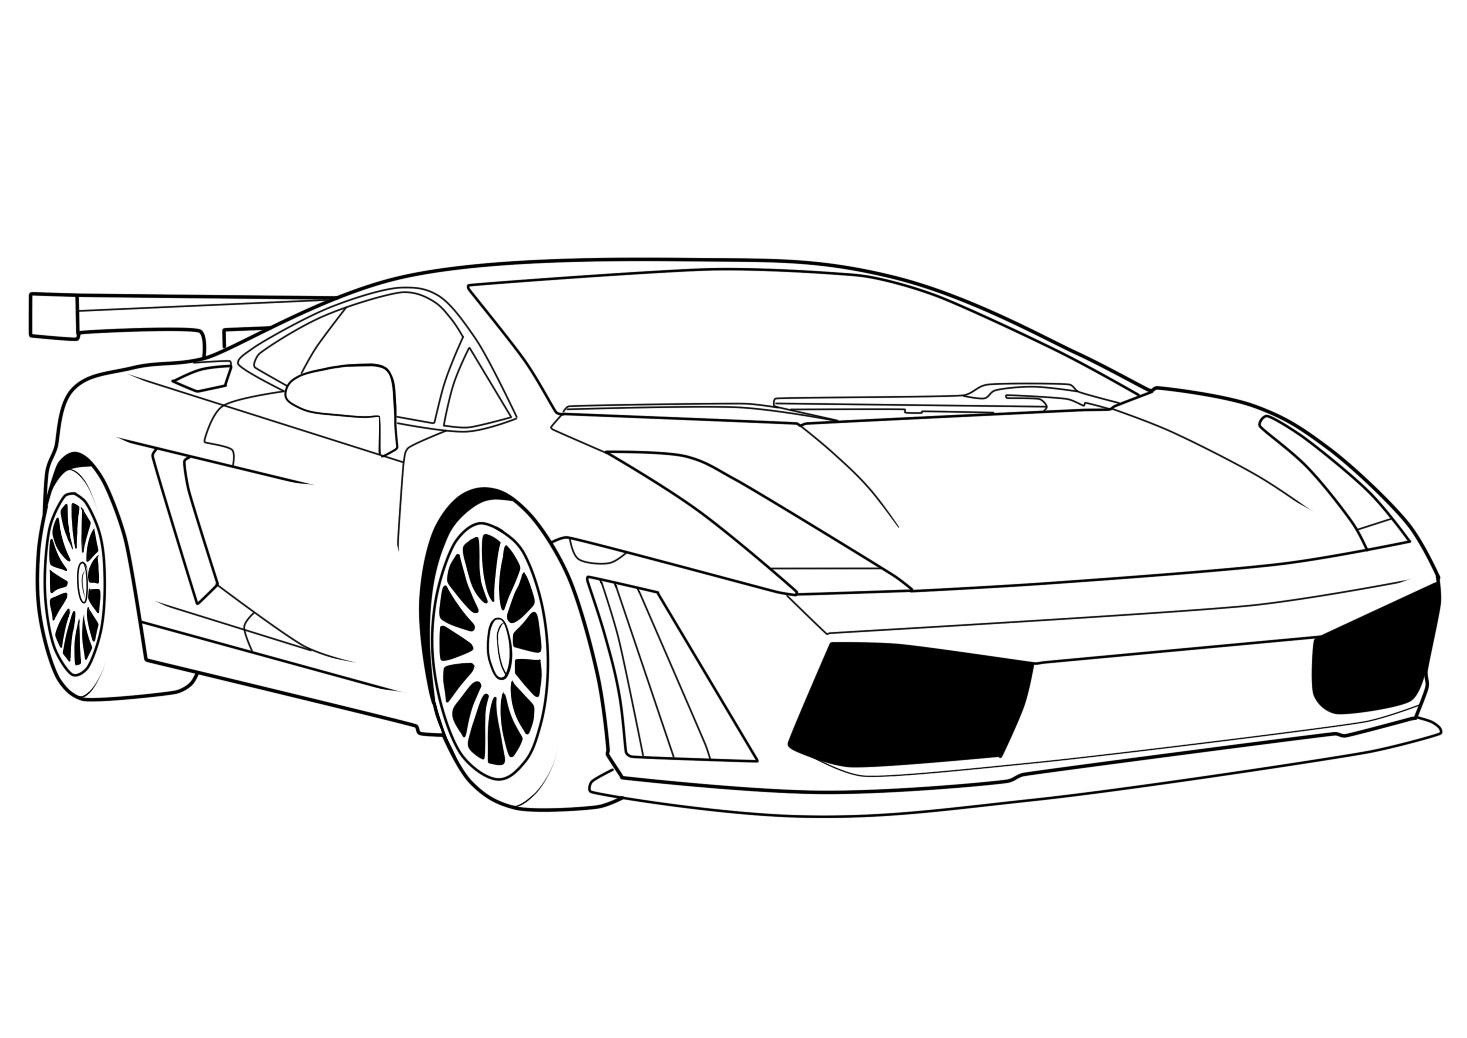 Lamborghini Free Coloring Pages For Boys
 Free Printable Lamborghini Coloring Pages For Kids